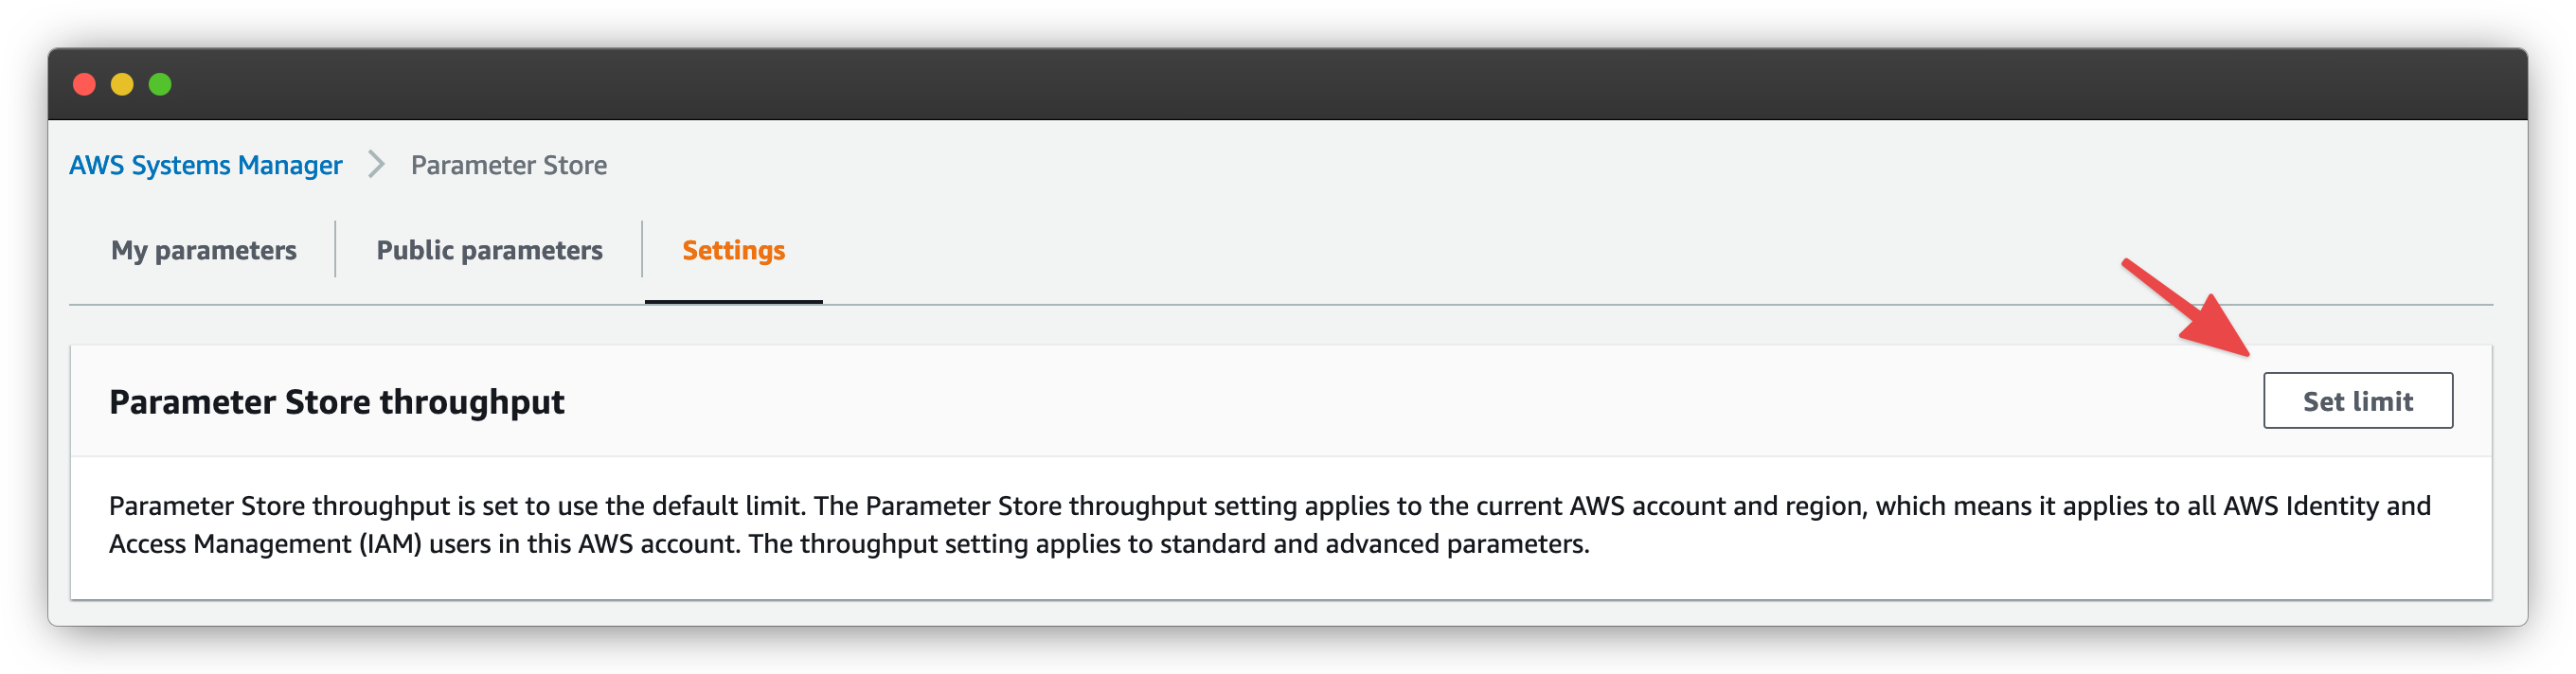 AWS System Manager settings page